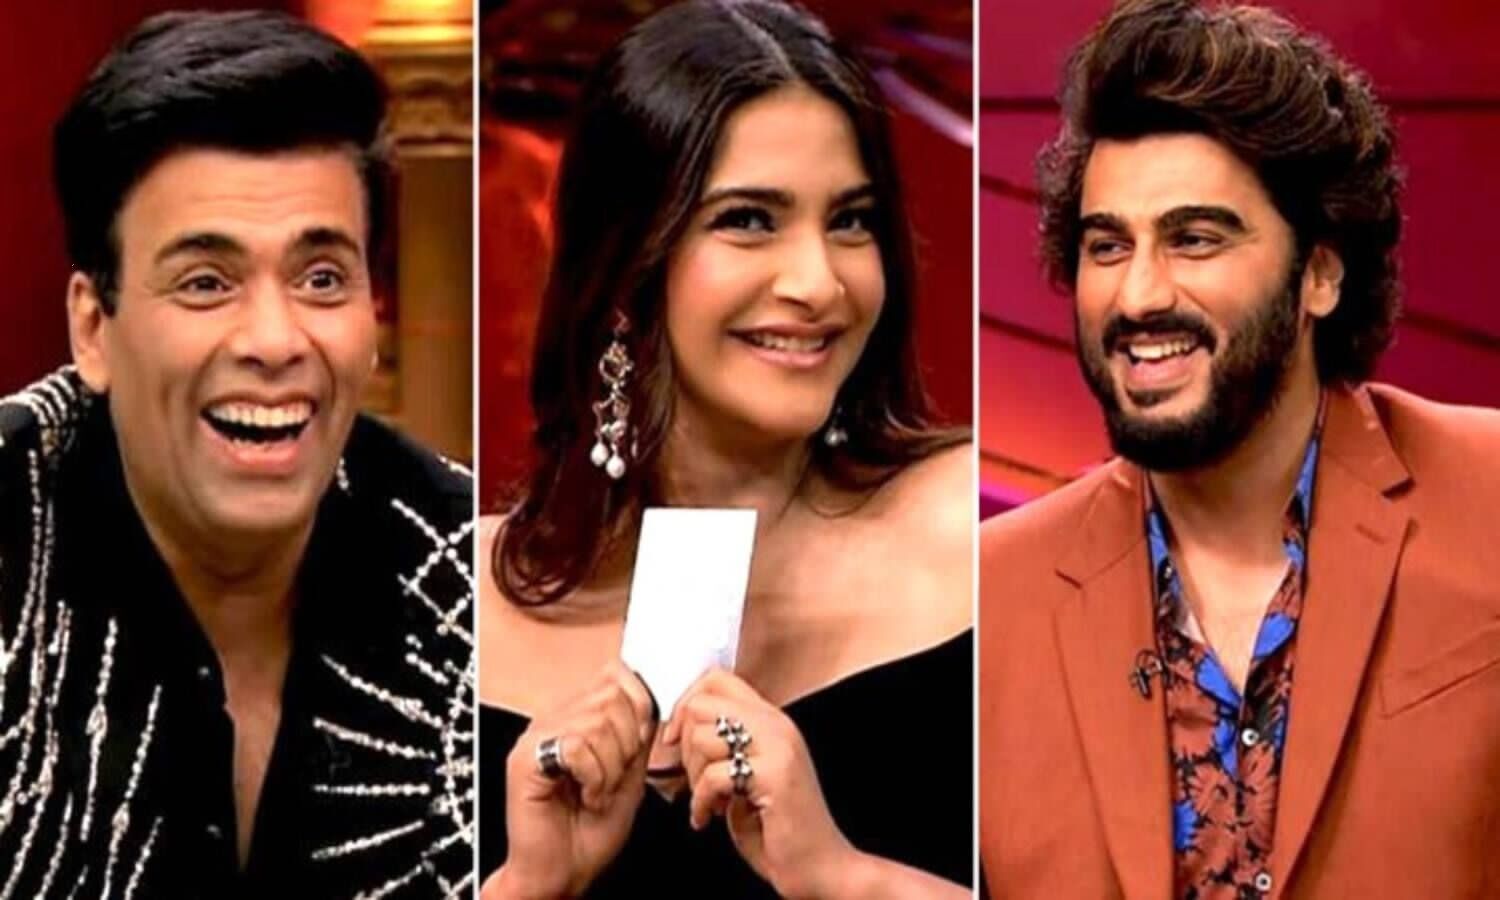 Koffee With Karan 7: Sonam Kapoor and Arjun Kapoor are coming on the show, many big revelations are going to happen